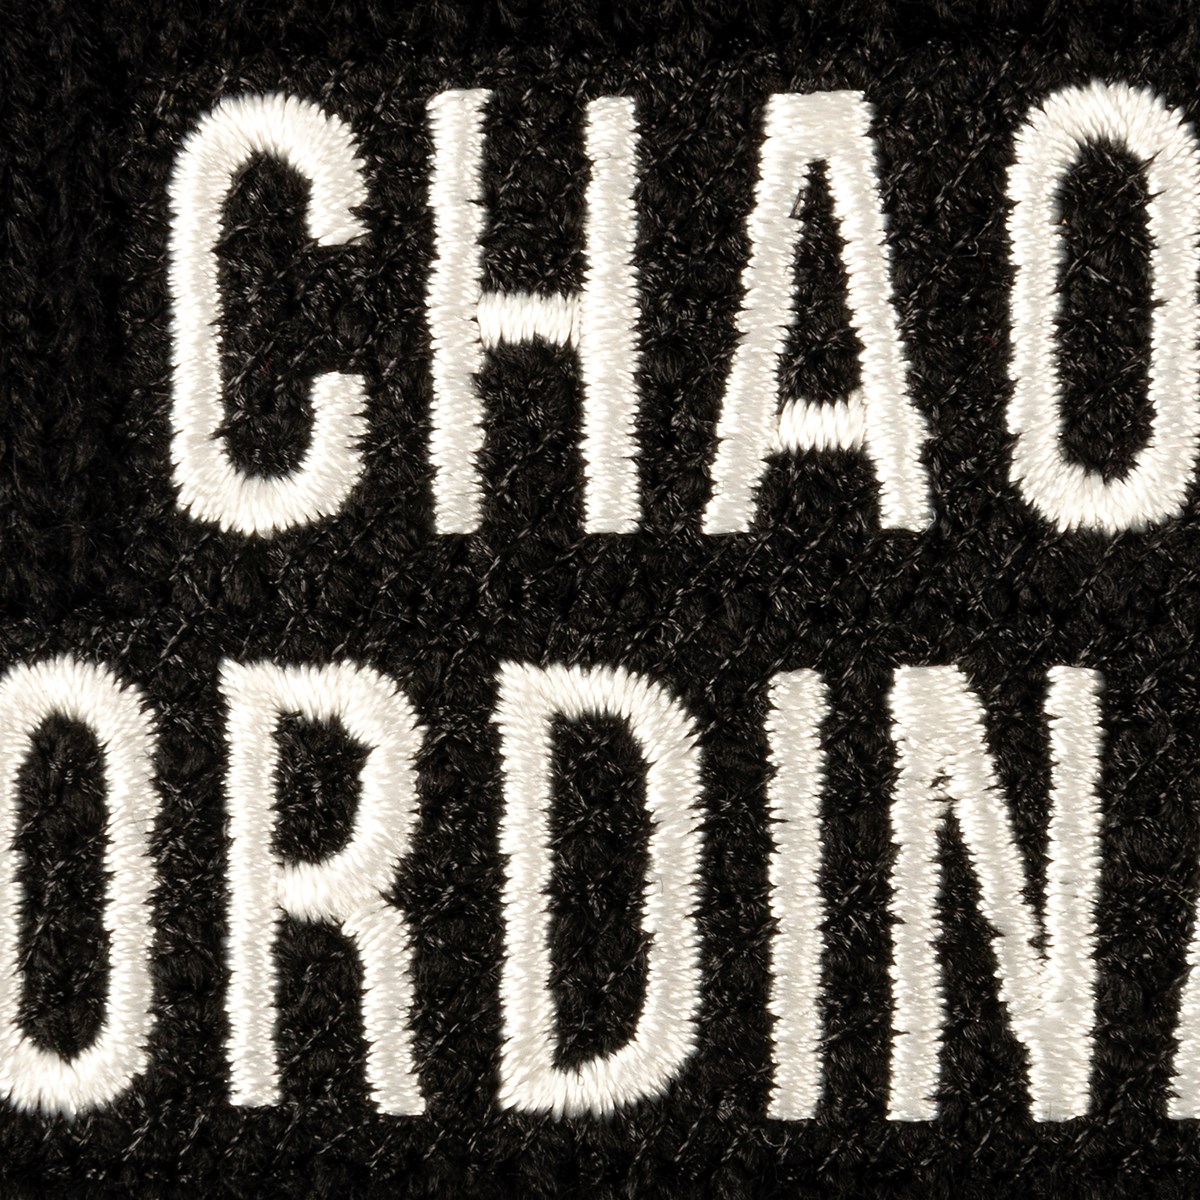 Beanie - Chaos Coordinator - One Size Fits Most - Acrylic